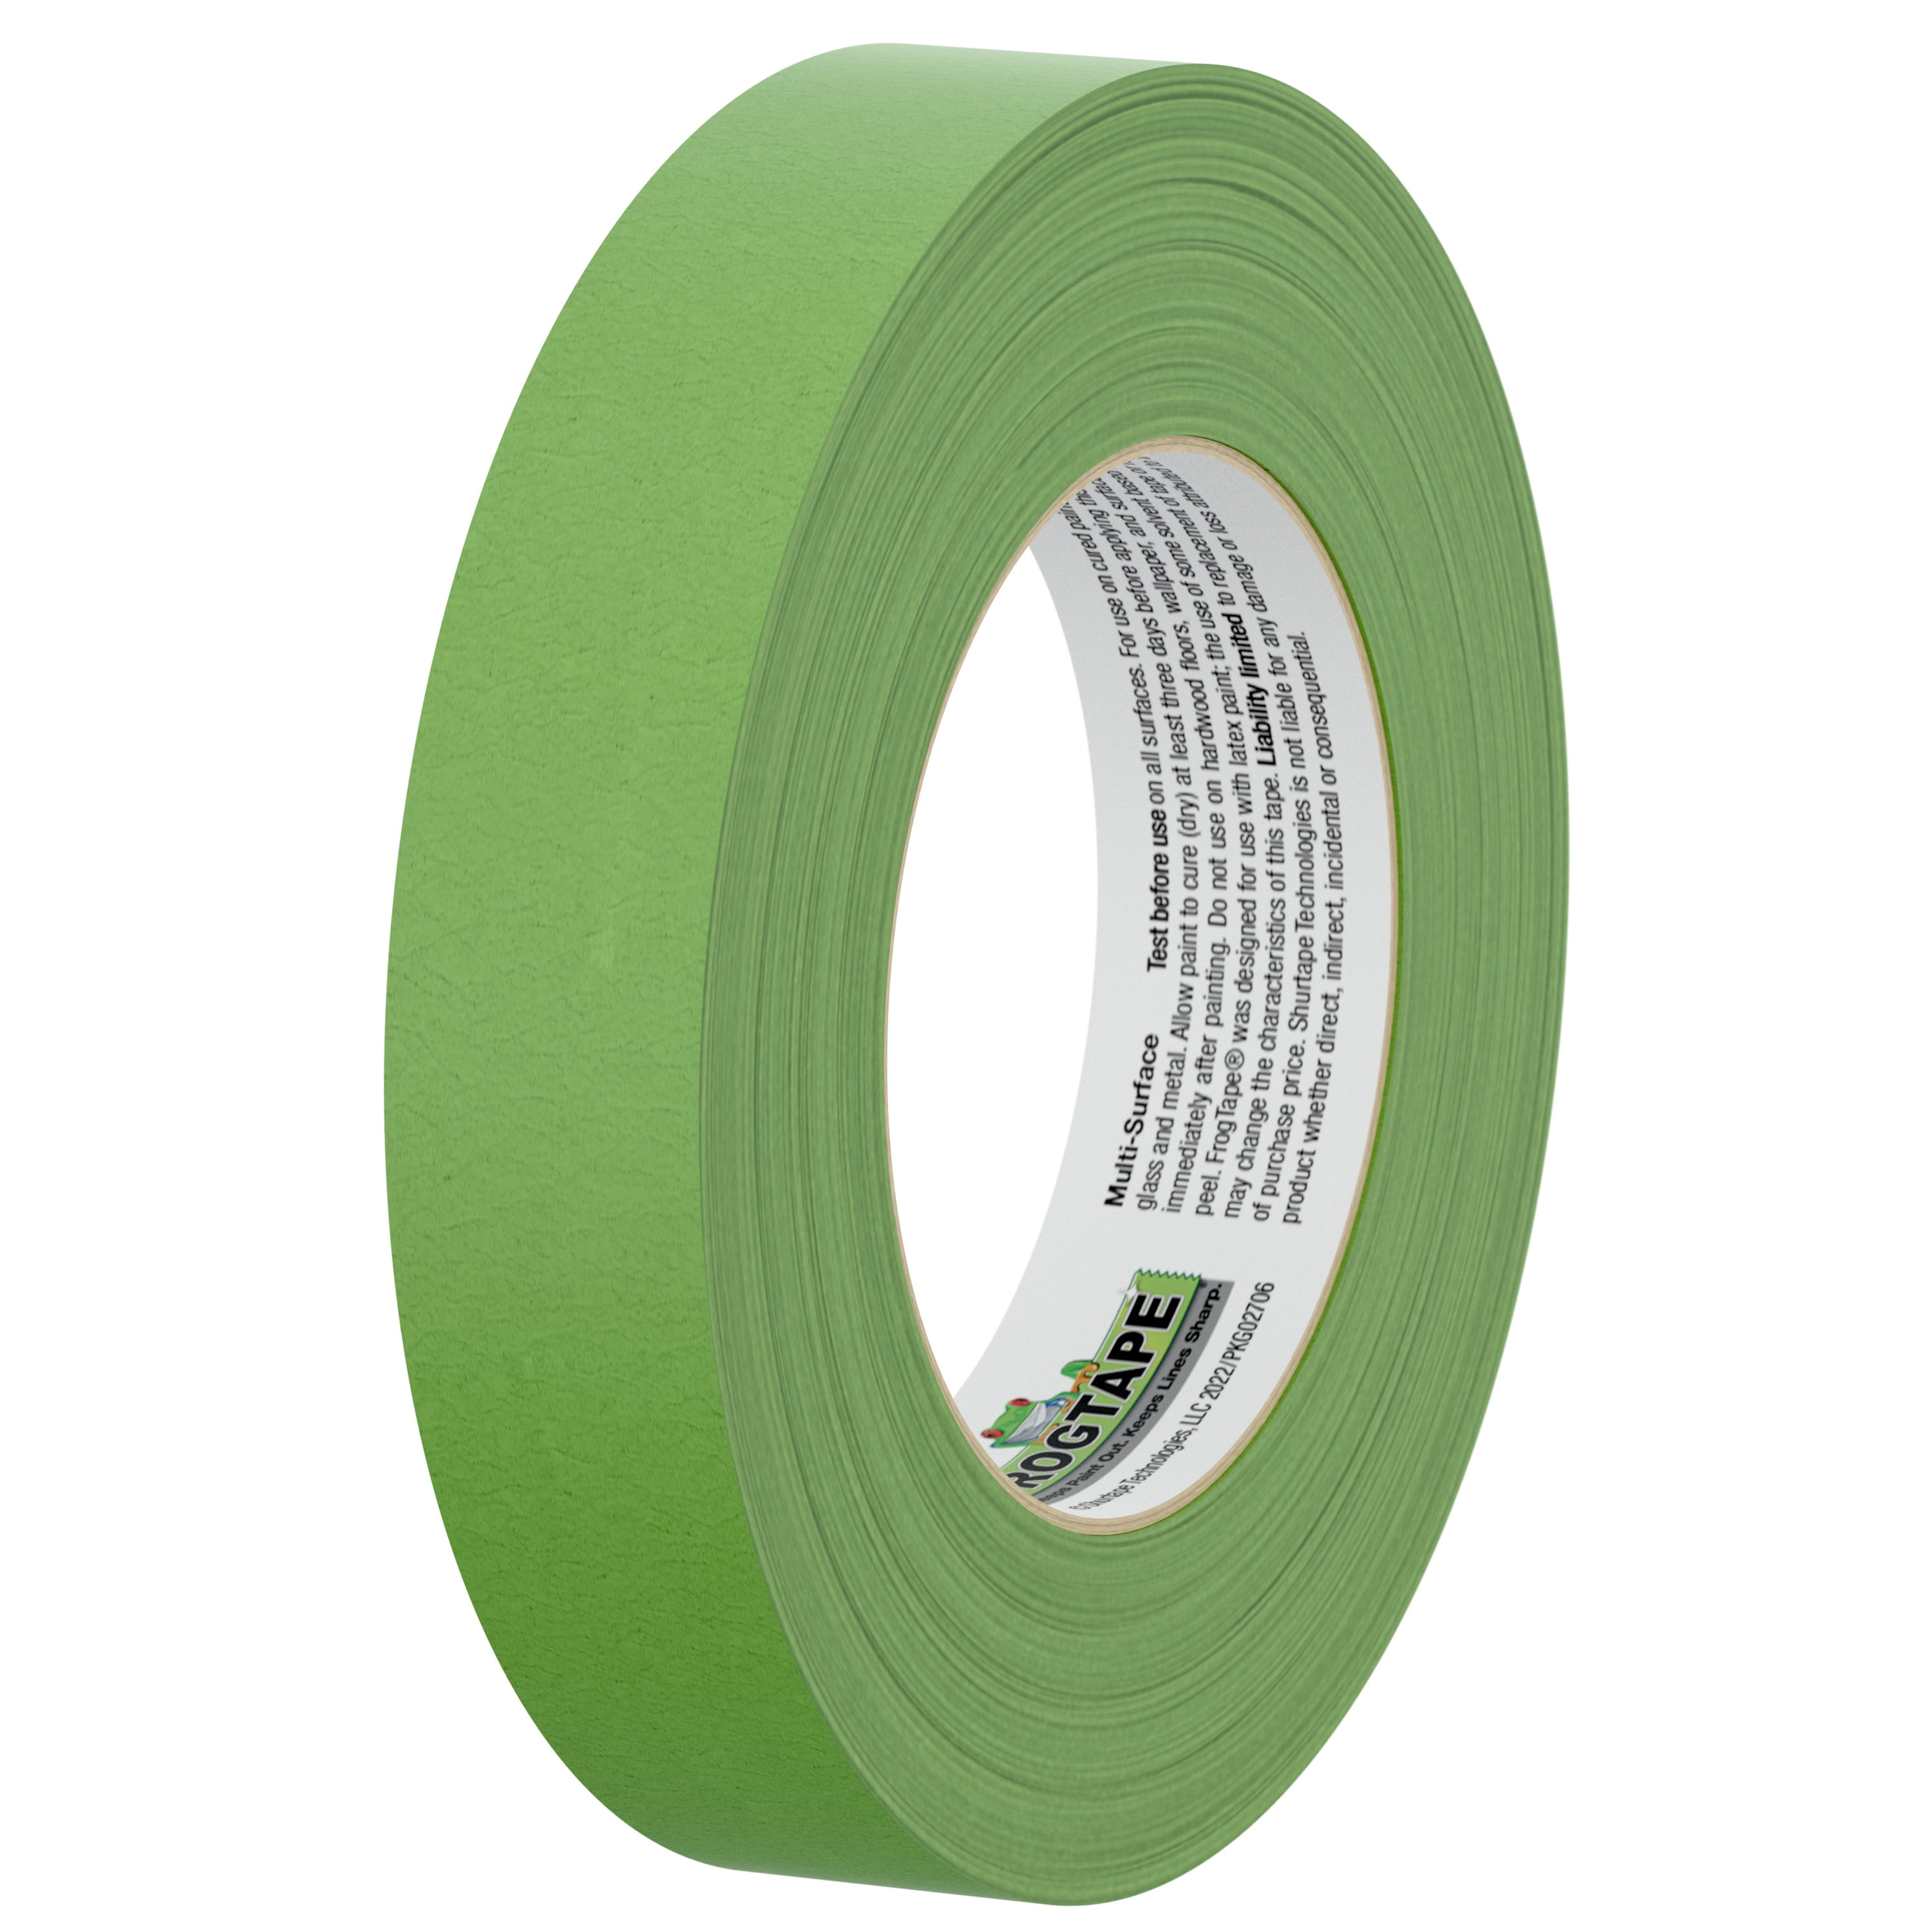 FrogTape 0.94 in. x 60 yd. Green Multi-surface Painting Tape, 2 Pack